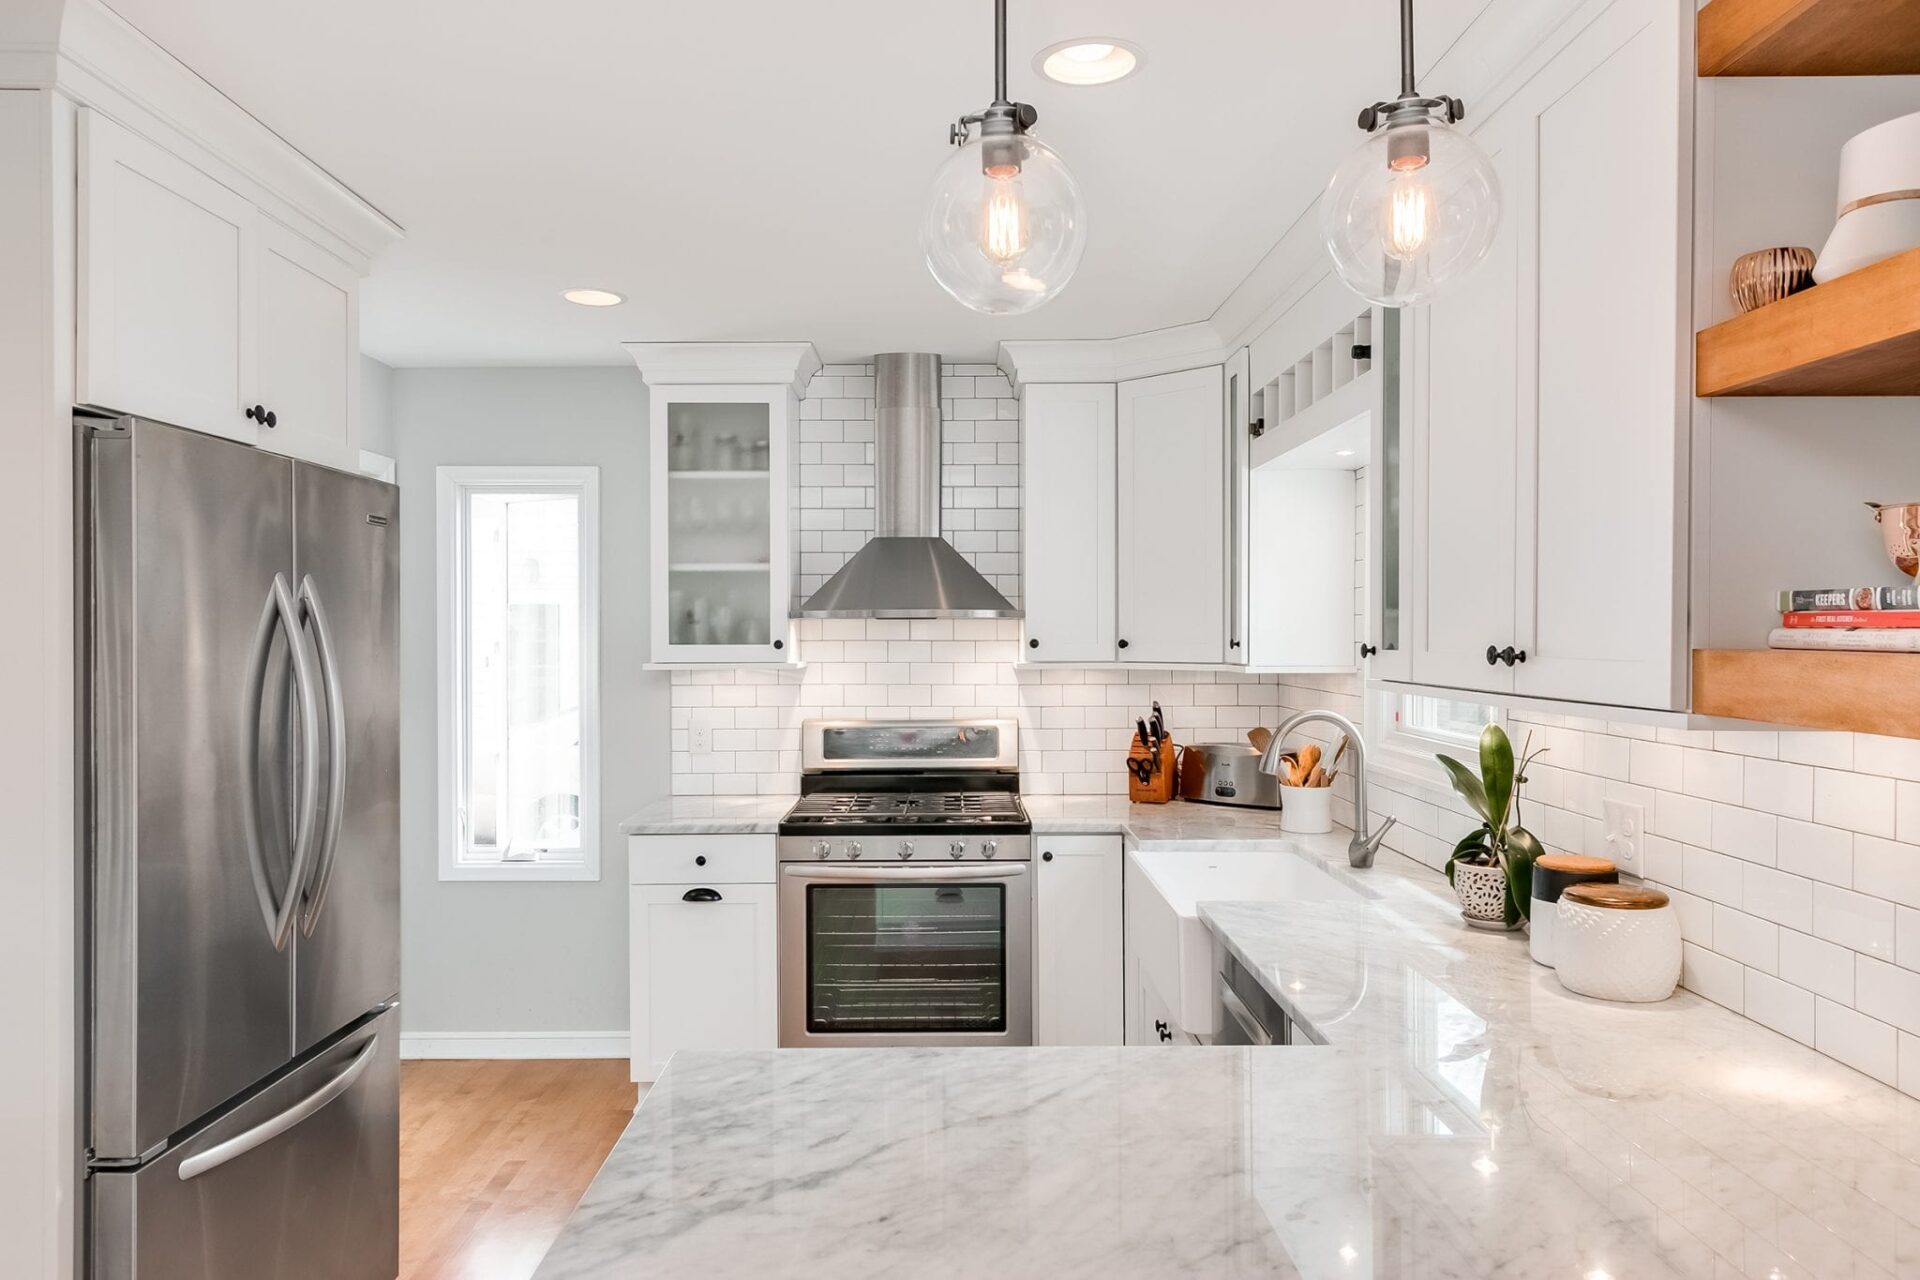 kitchen remodel | white finishes and open wood shelving